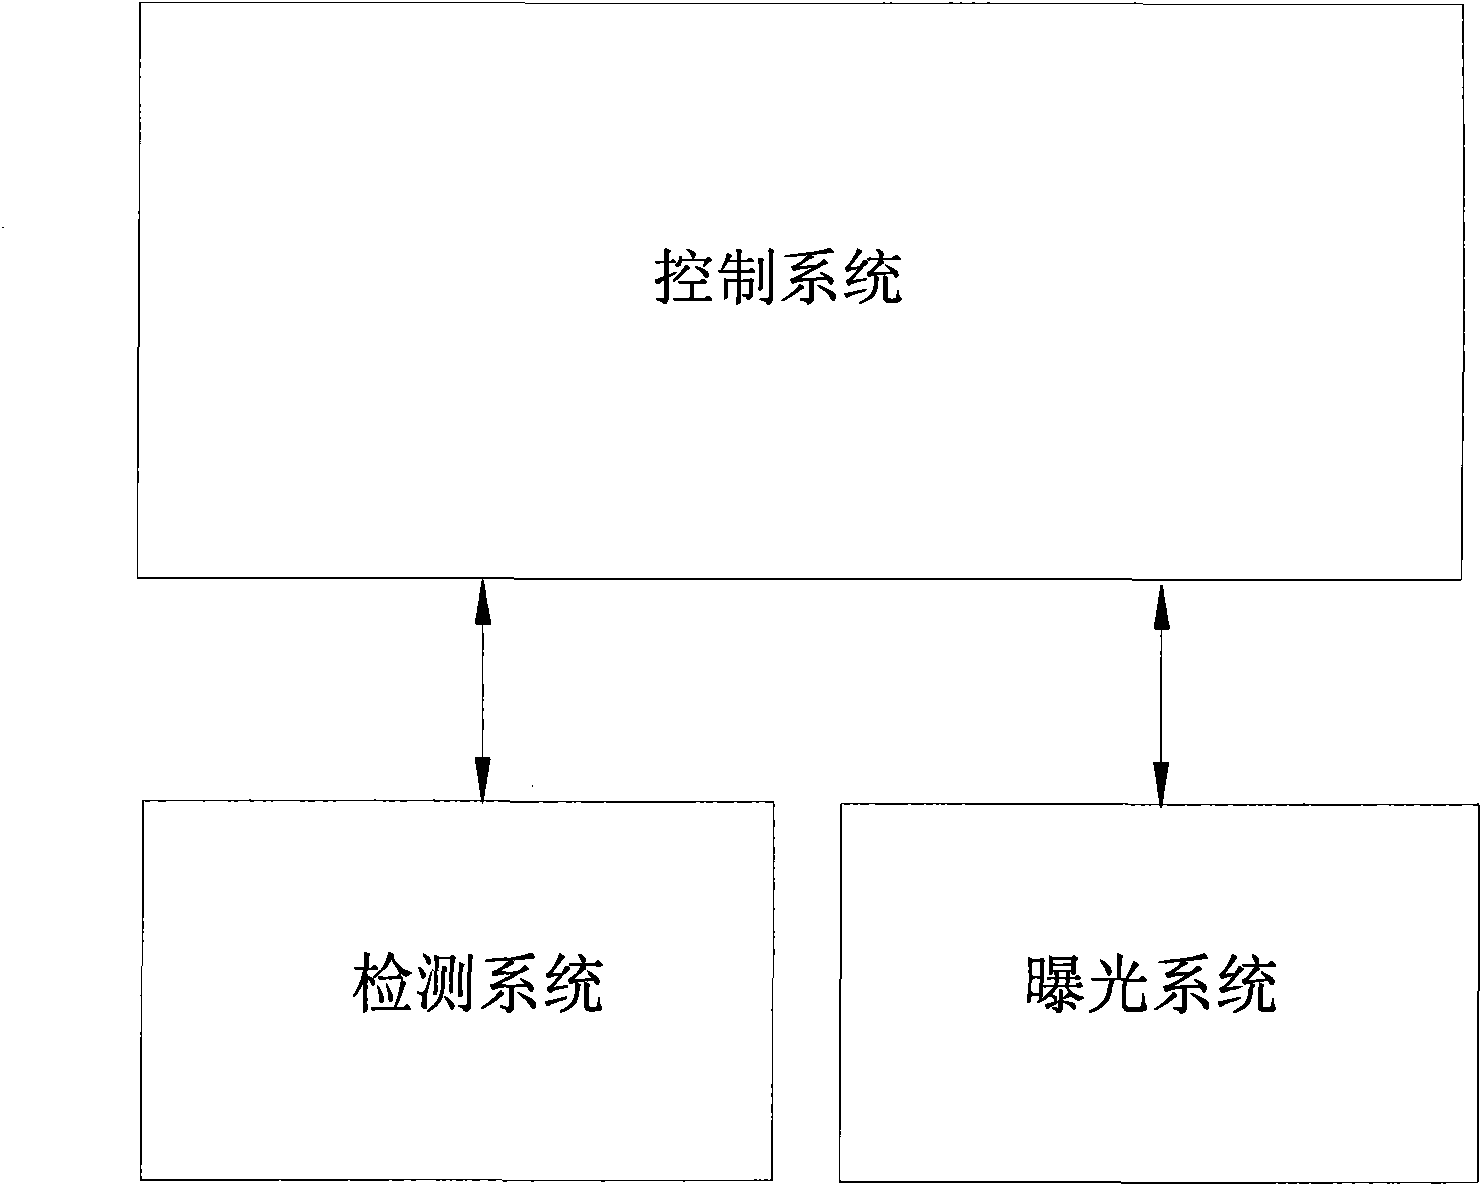 Breast X-ray machine and method for realizing fully automatic exposure